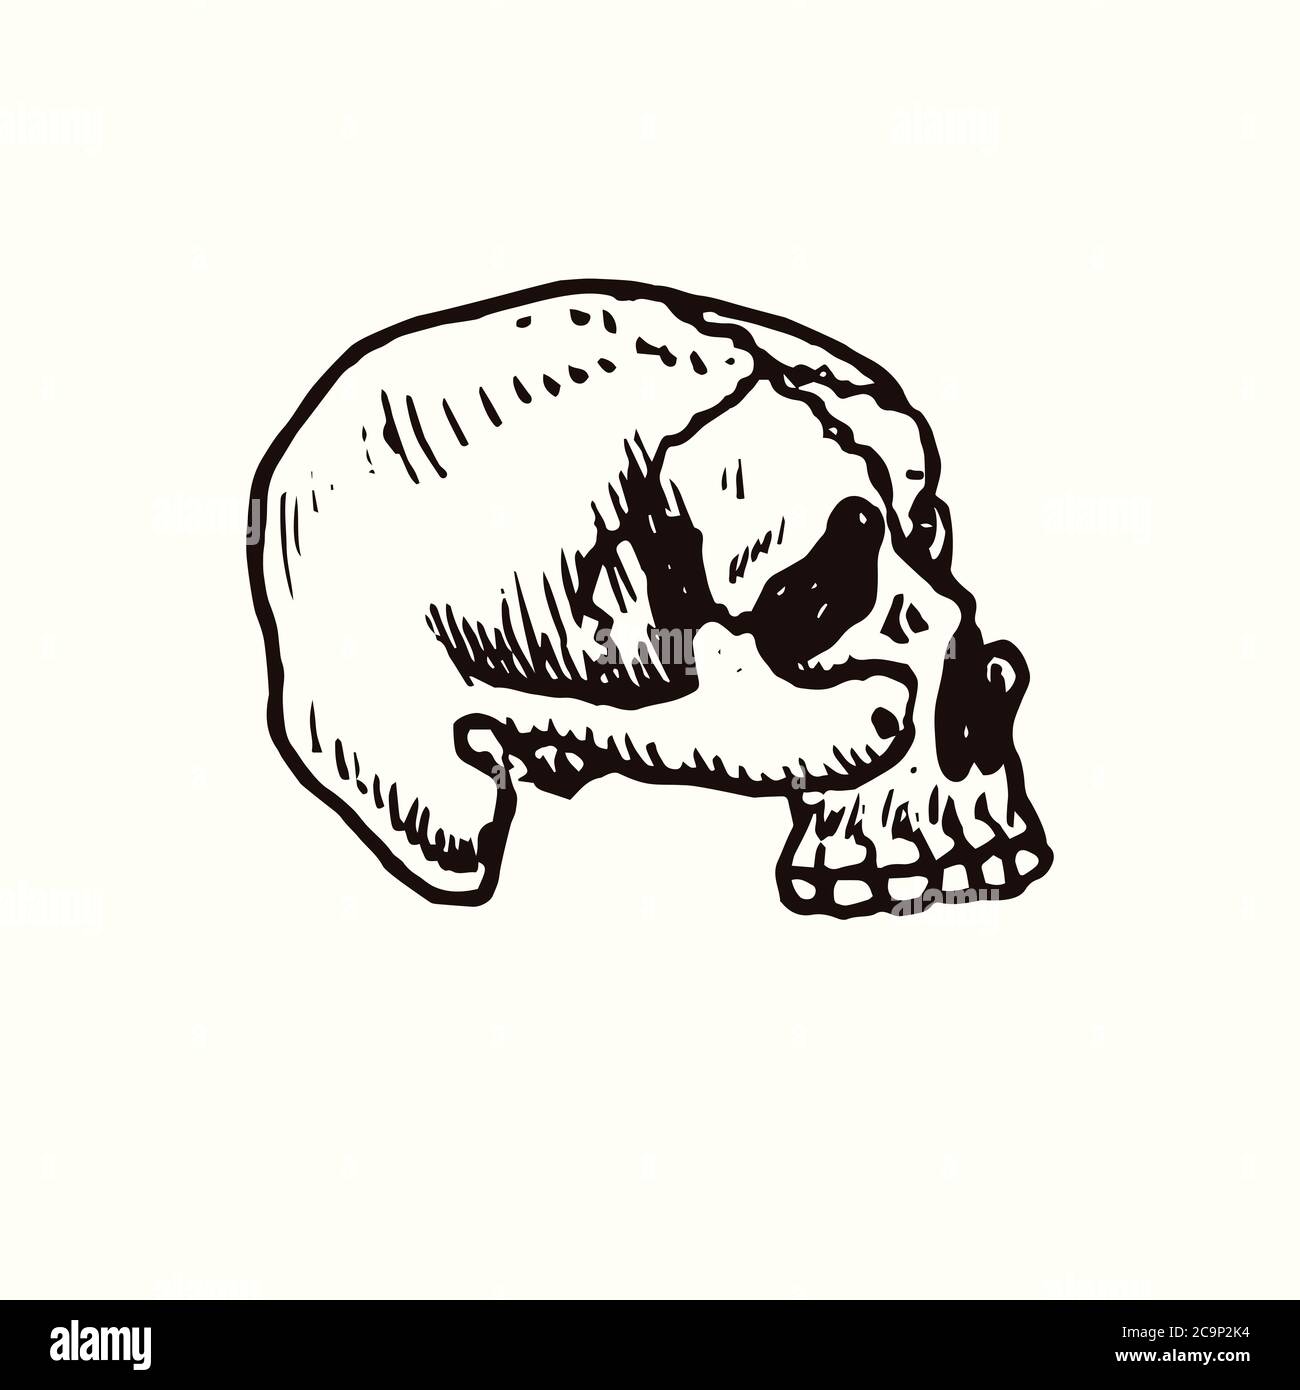 Premium Vector  A blackandwhite illustration of a skull which is side view